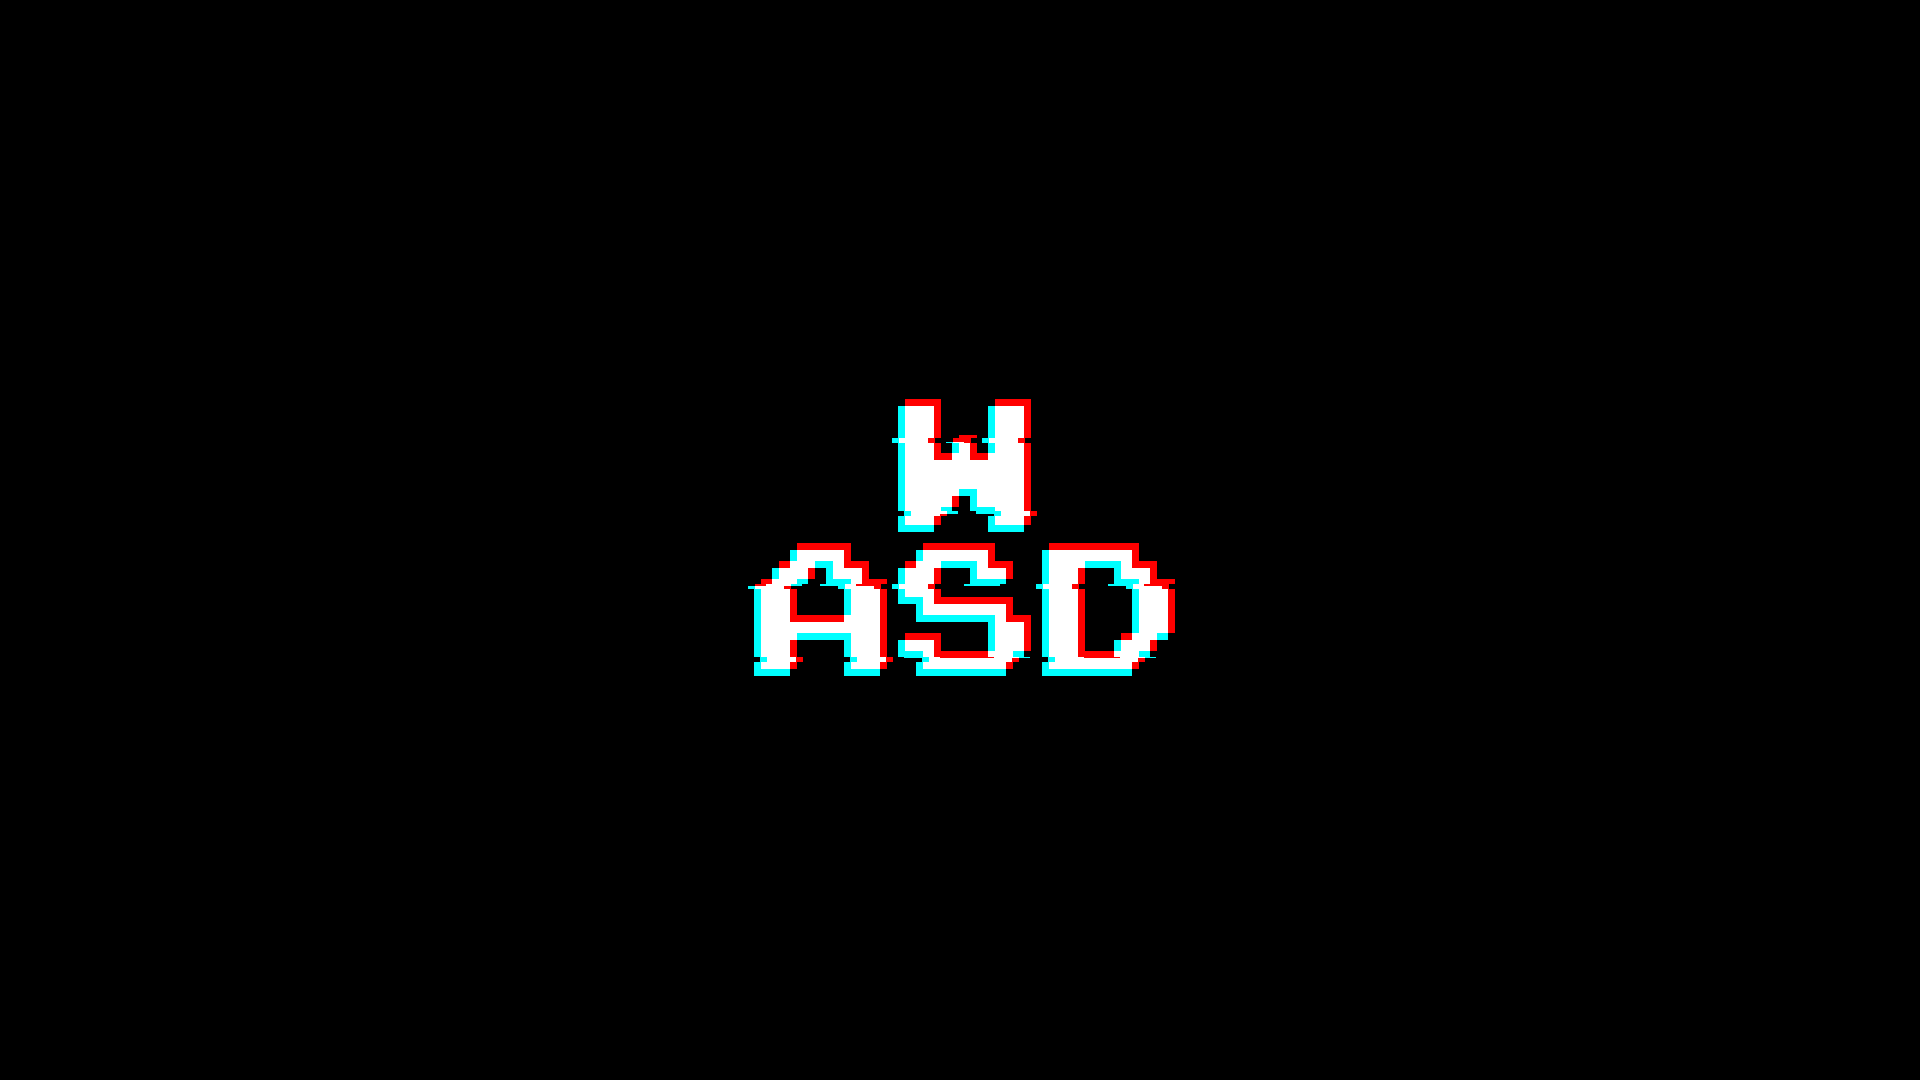 WASD [1920x1080] (MADE BY ME)